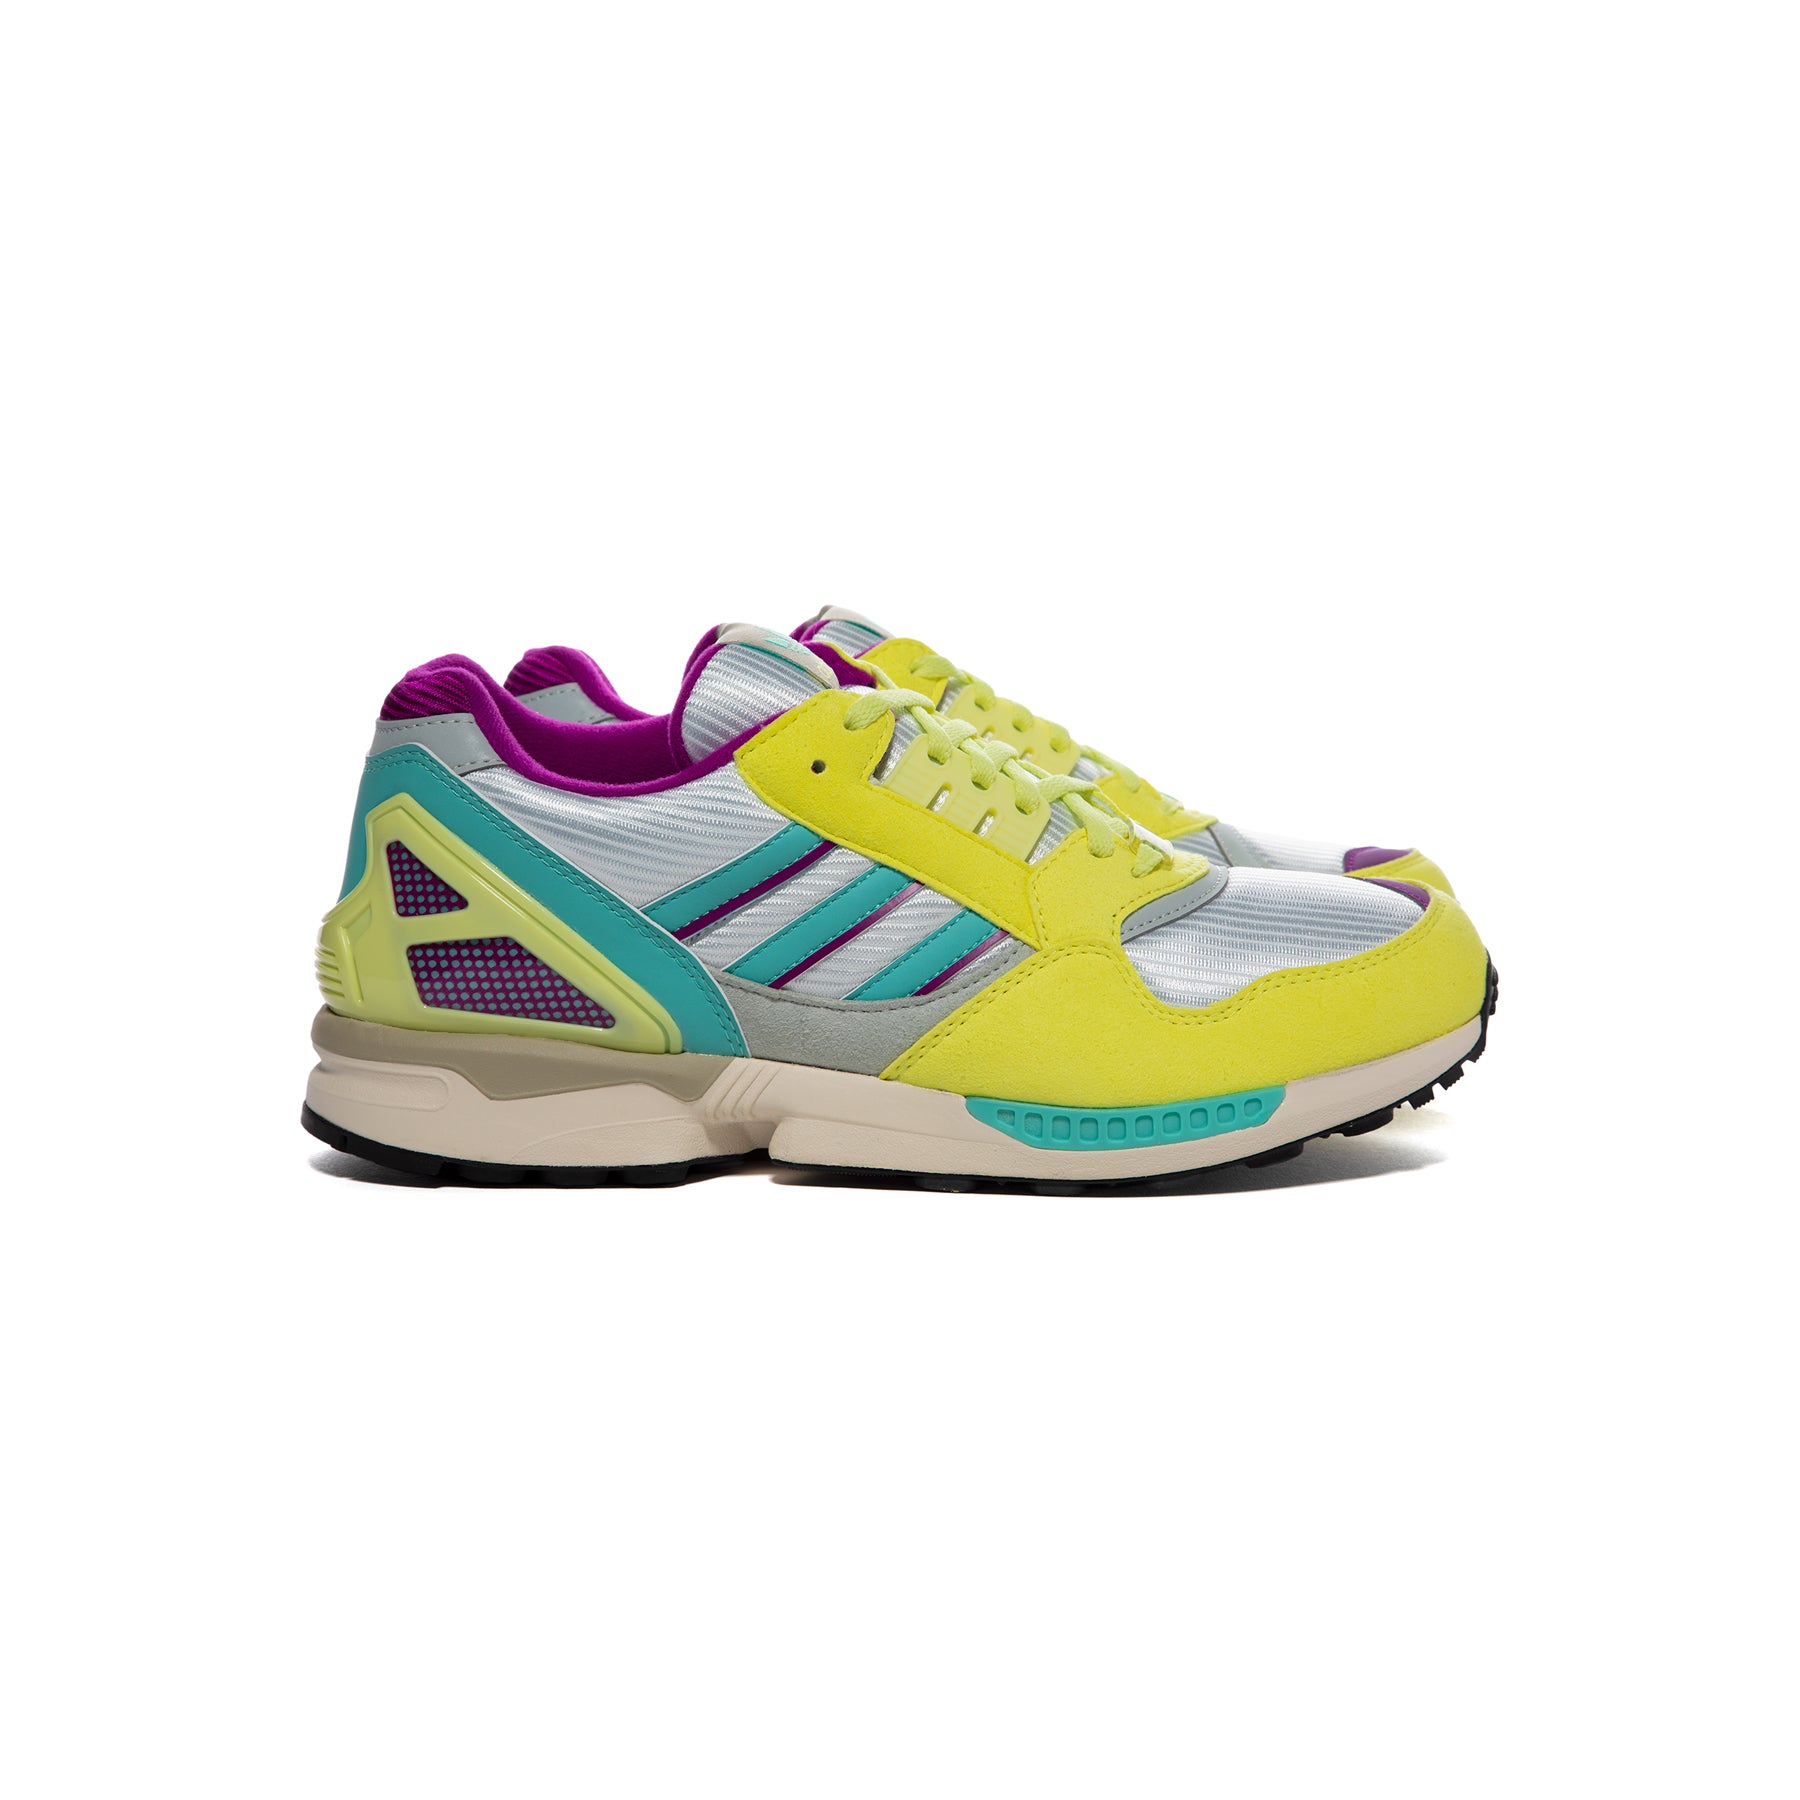 adidas ZX9000 (Pulse Yellow/Ash Silver/Acid Mint) Concepts